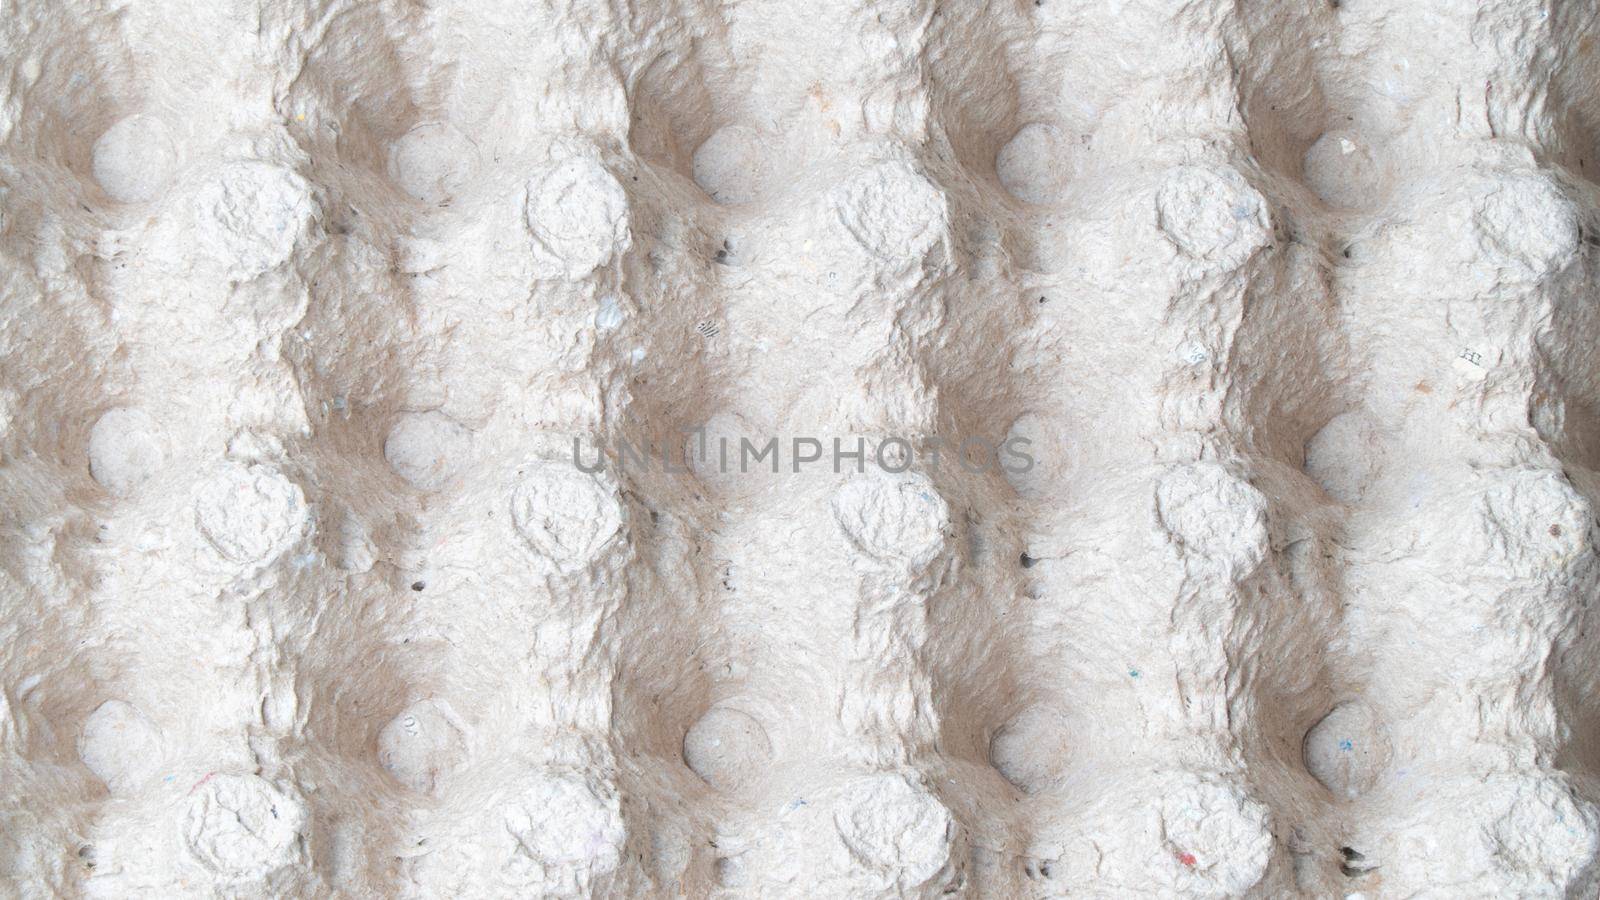 close-up white egg lattice background three-dimensional pattern with bulges